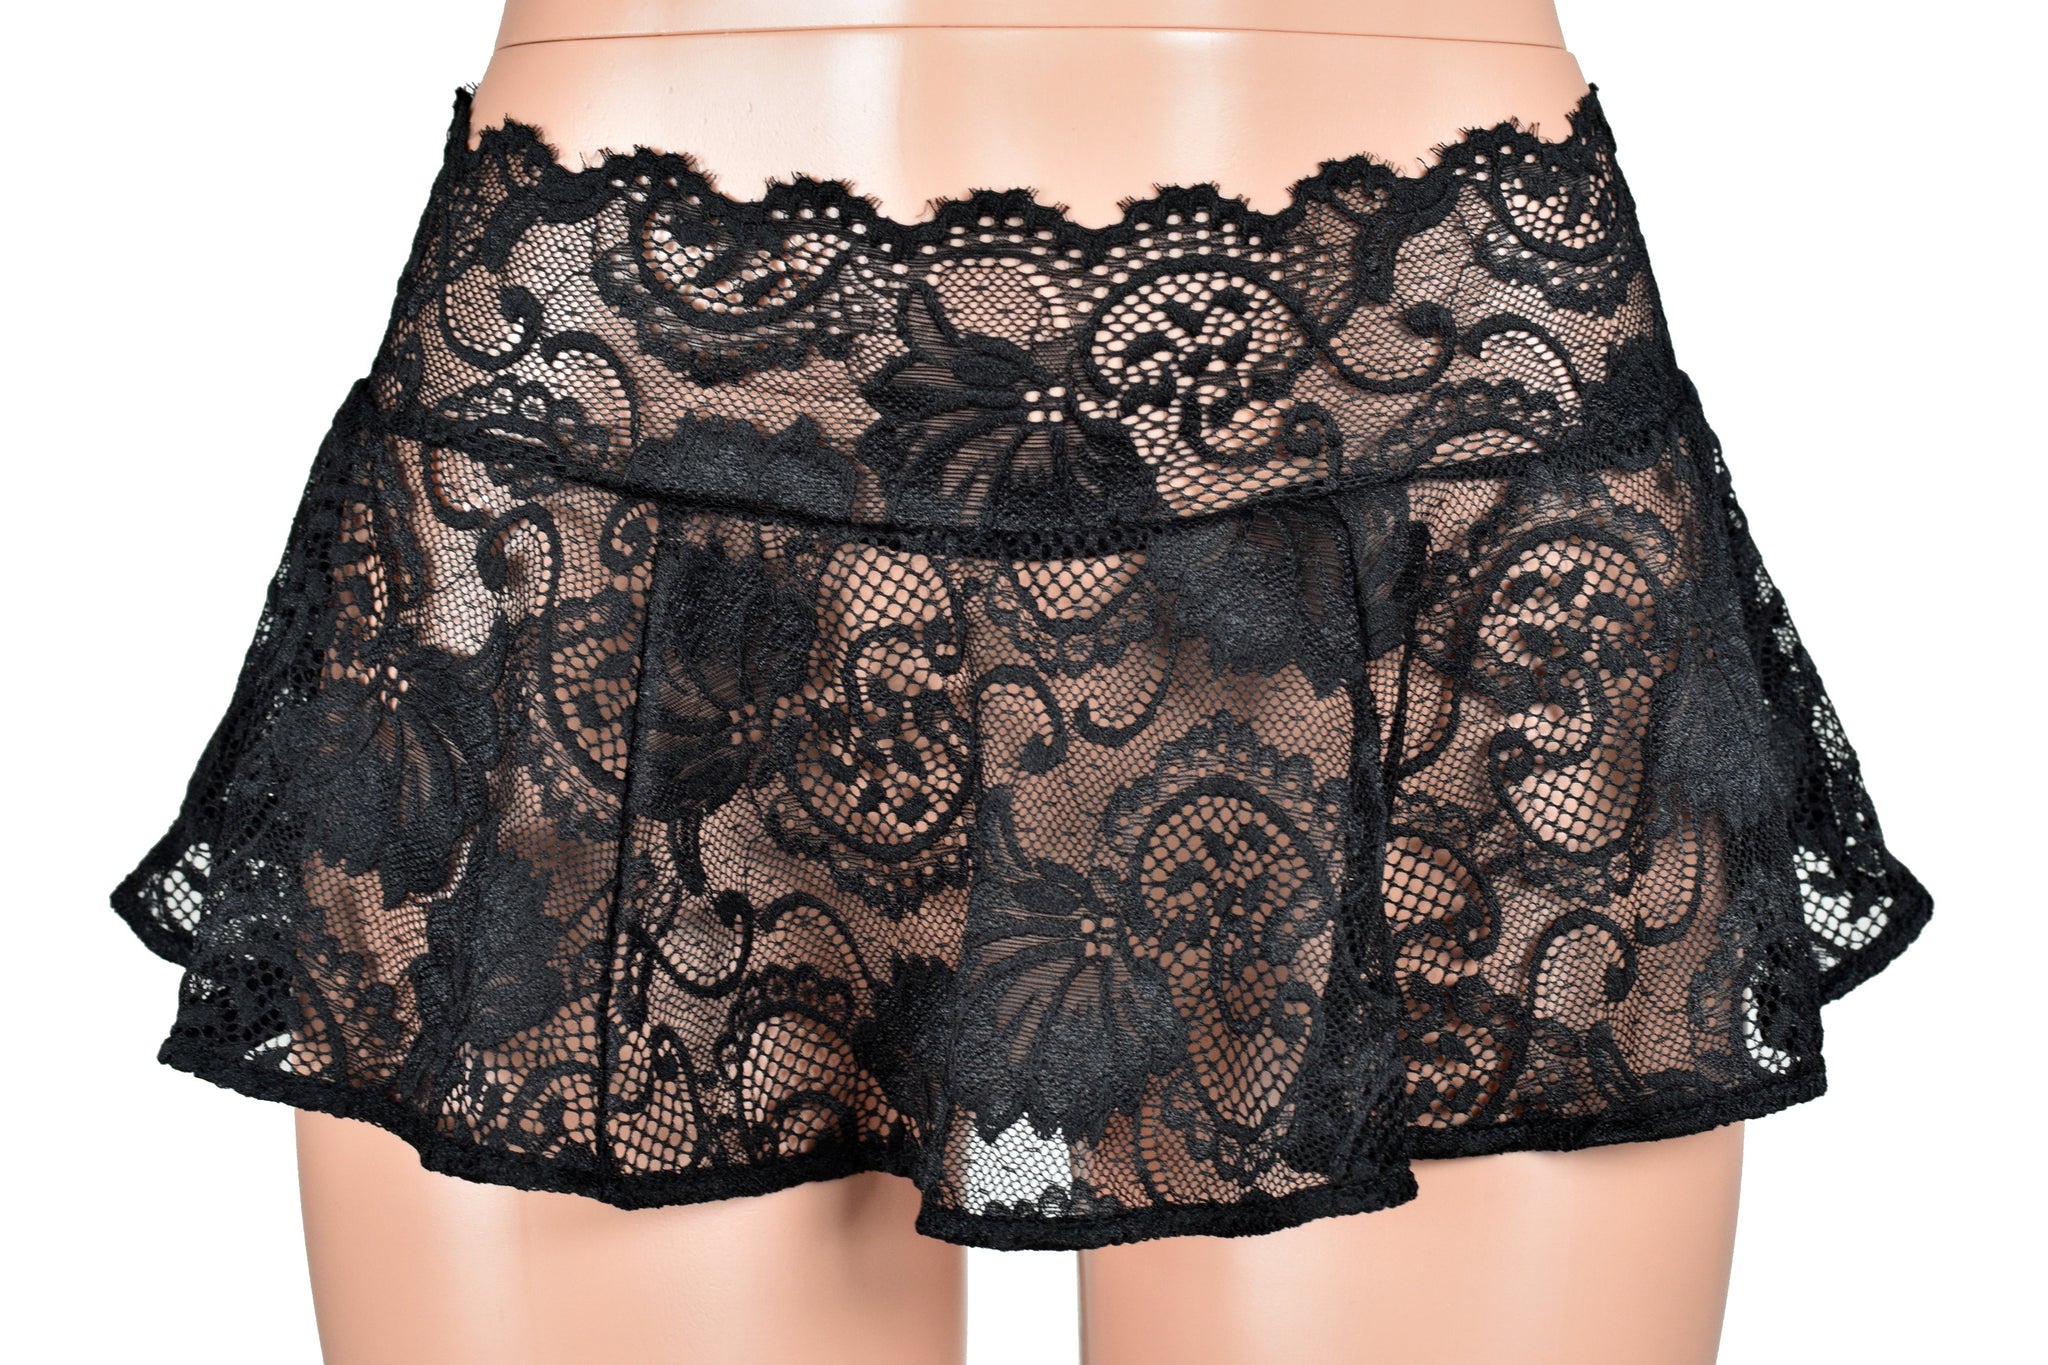 Sheer Black Lace Micro Mini Skirt plus size goth gothic lingerie ...